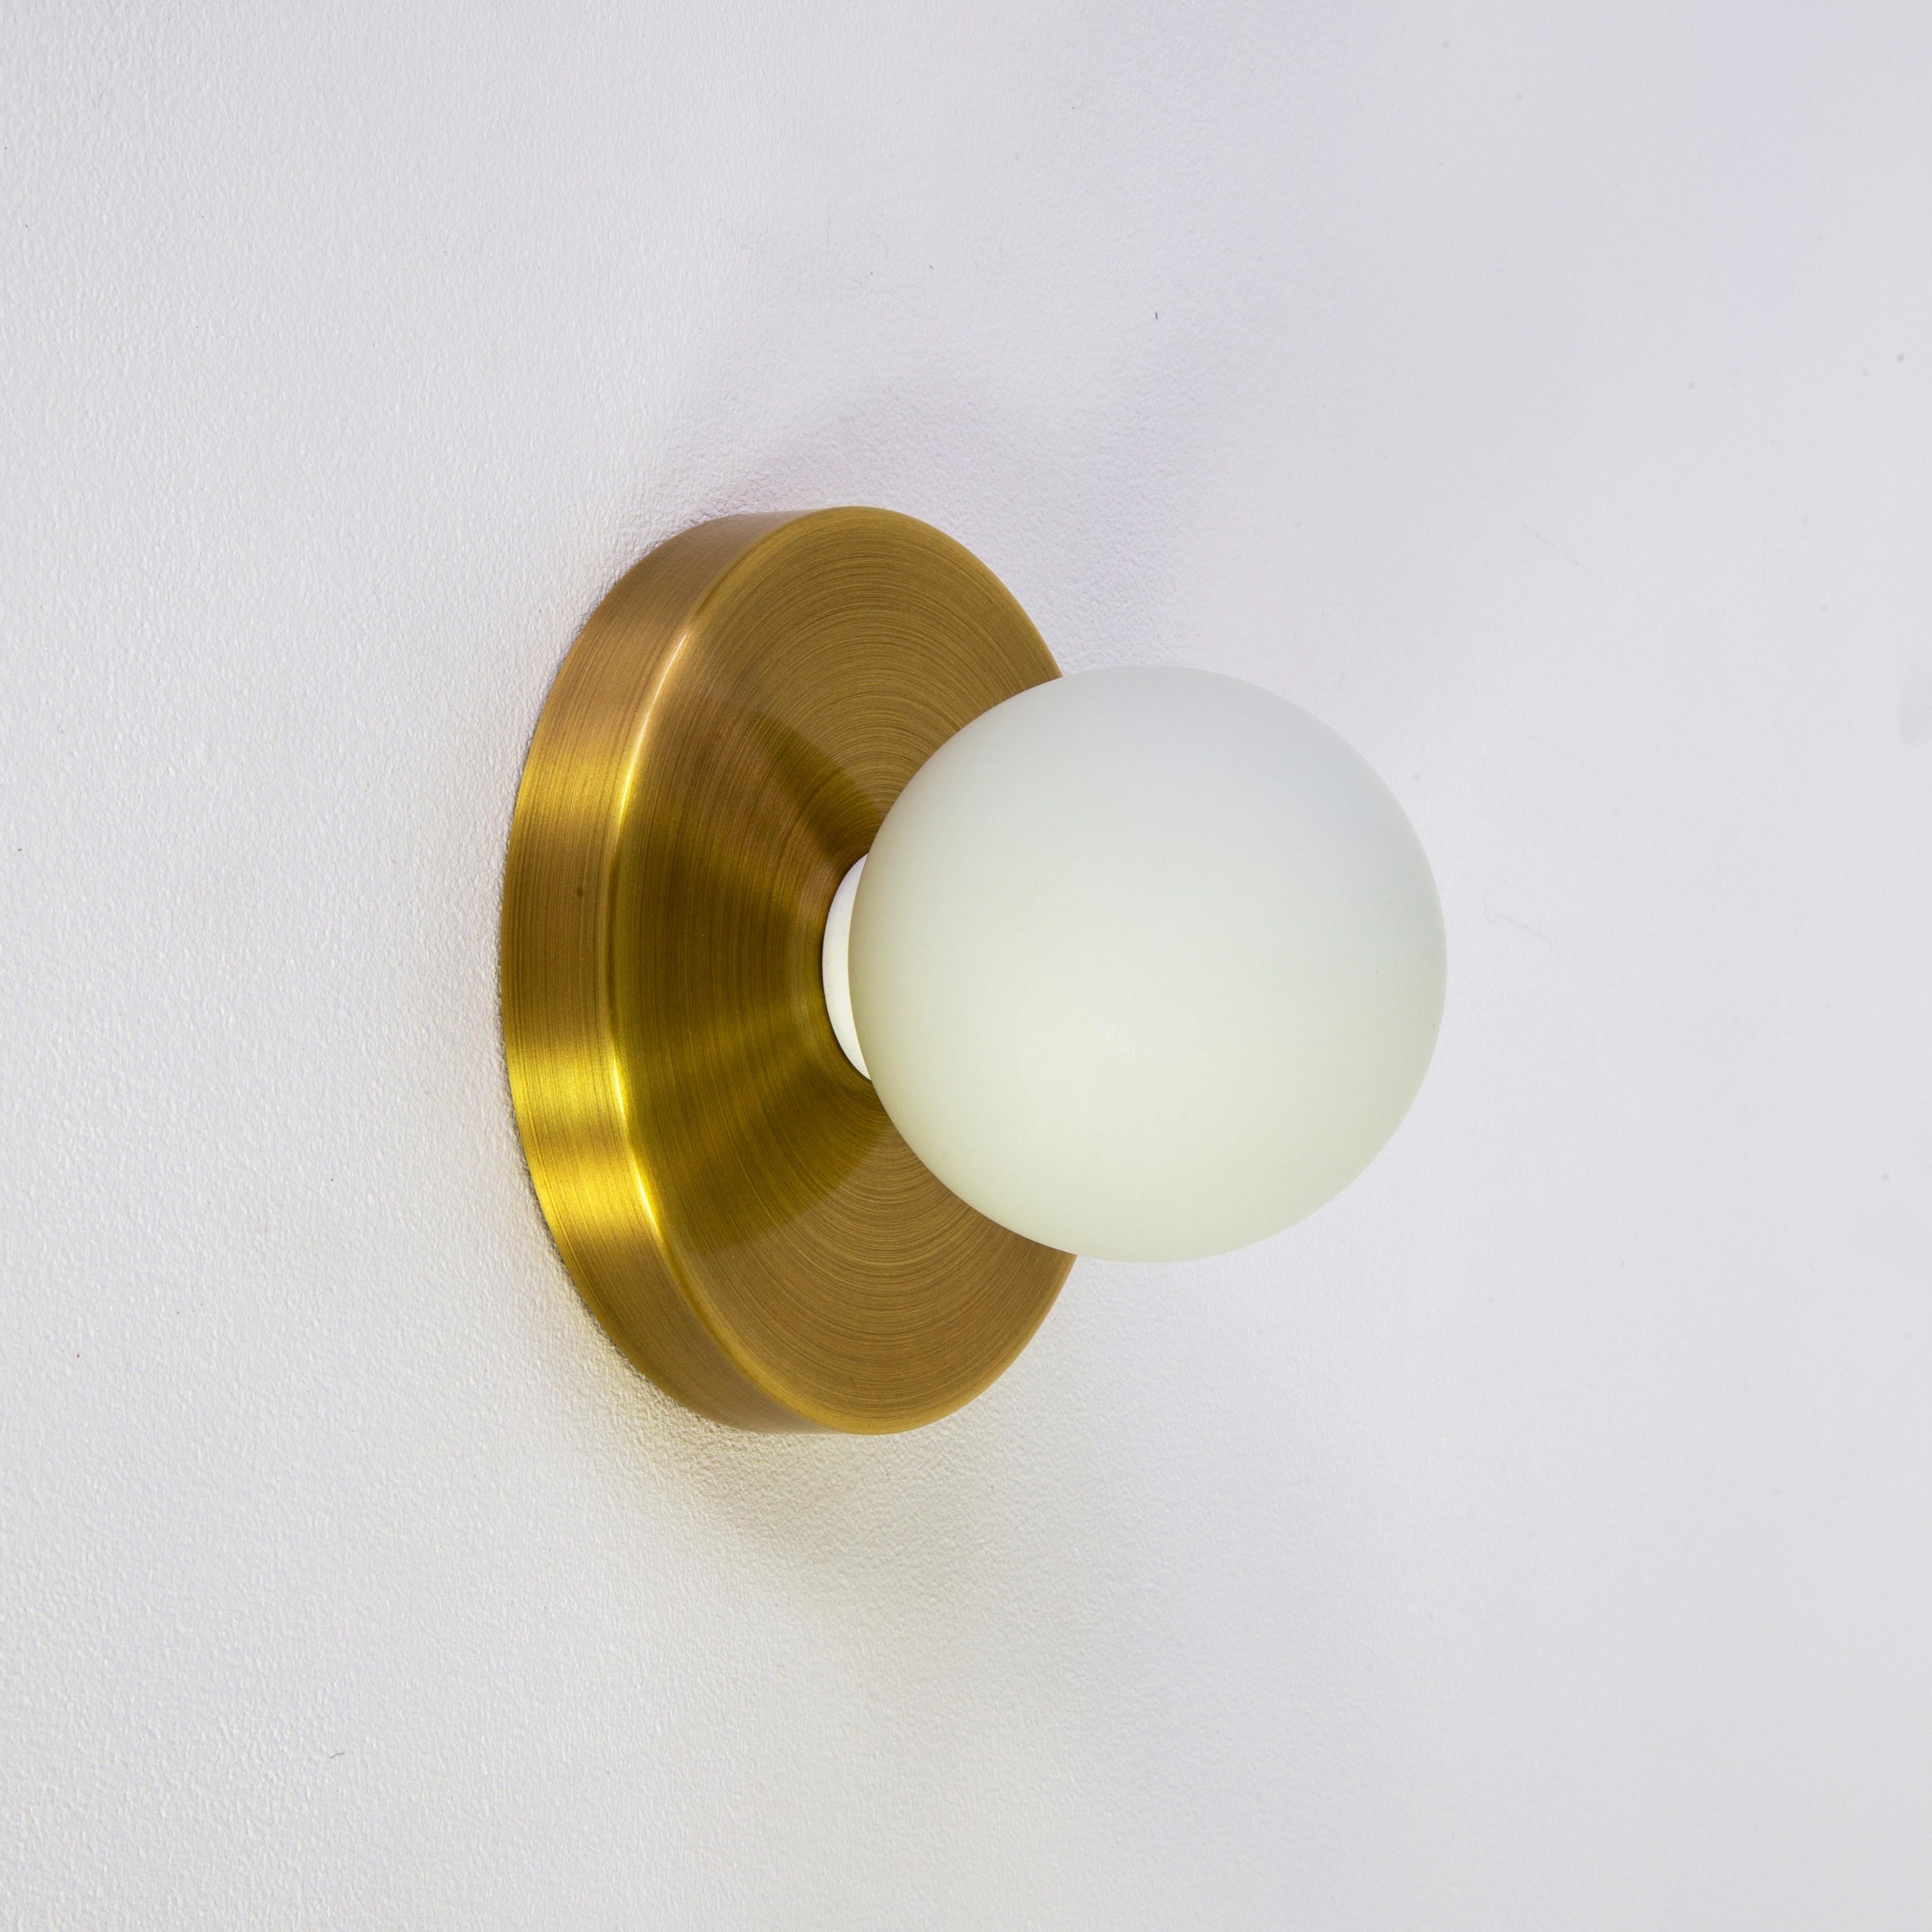 This listing is for 2x Globe Sconces in brushed brass designed and manufactured by Research.Lighting.

Materials: Brass, Steel & Glass
Finish: Brushed Brass
Electronics: 1x G9 Socket, 1x 4.5 Watt LED Bulb (included), 450 Lumens
ADA Compliant. UL